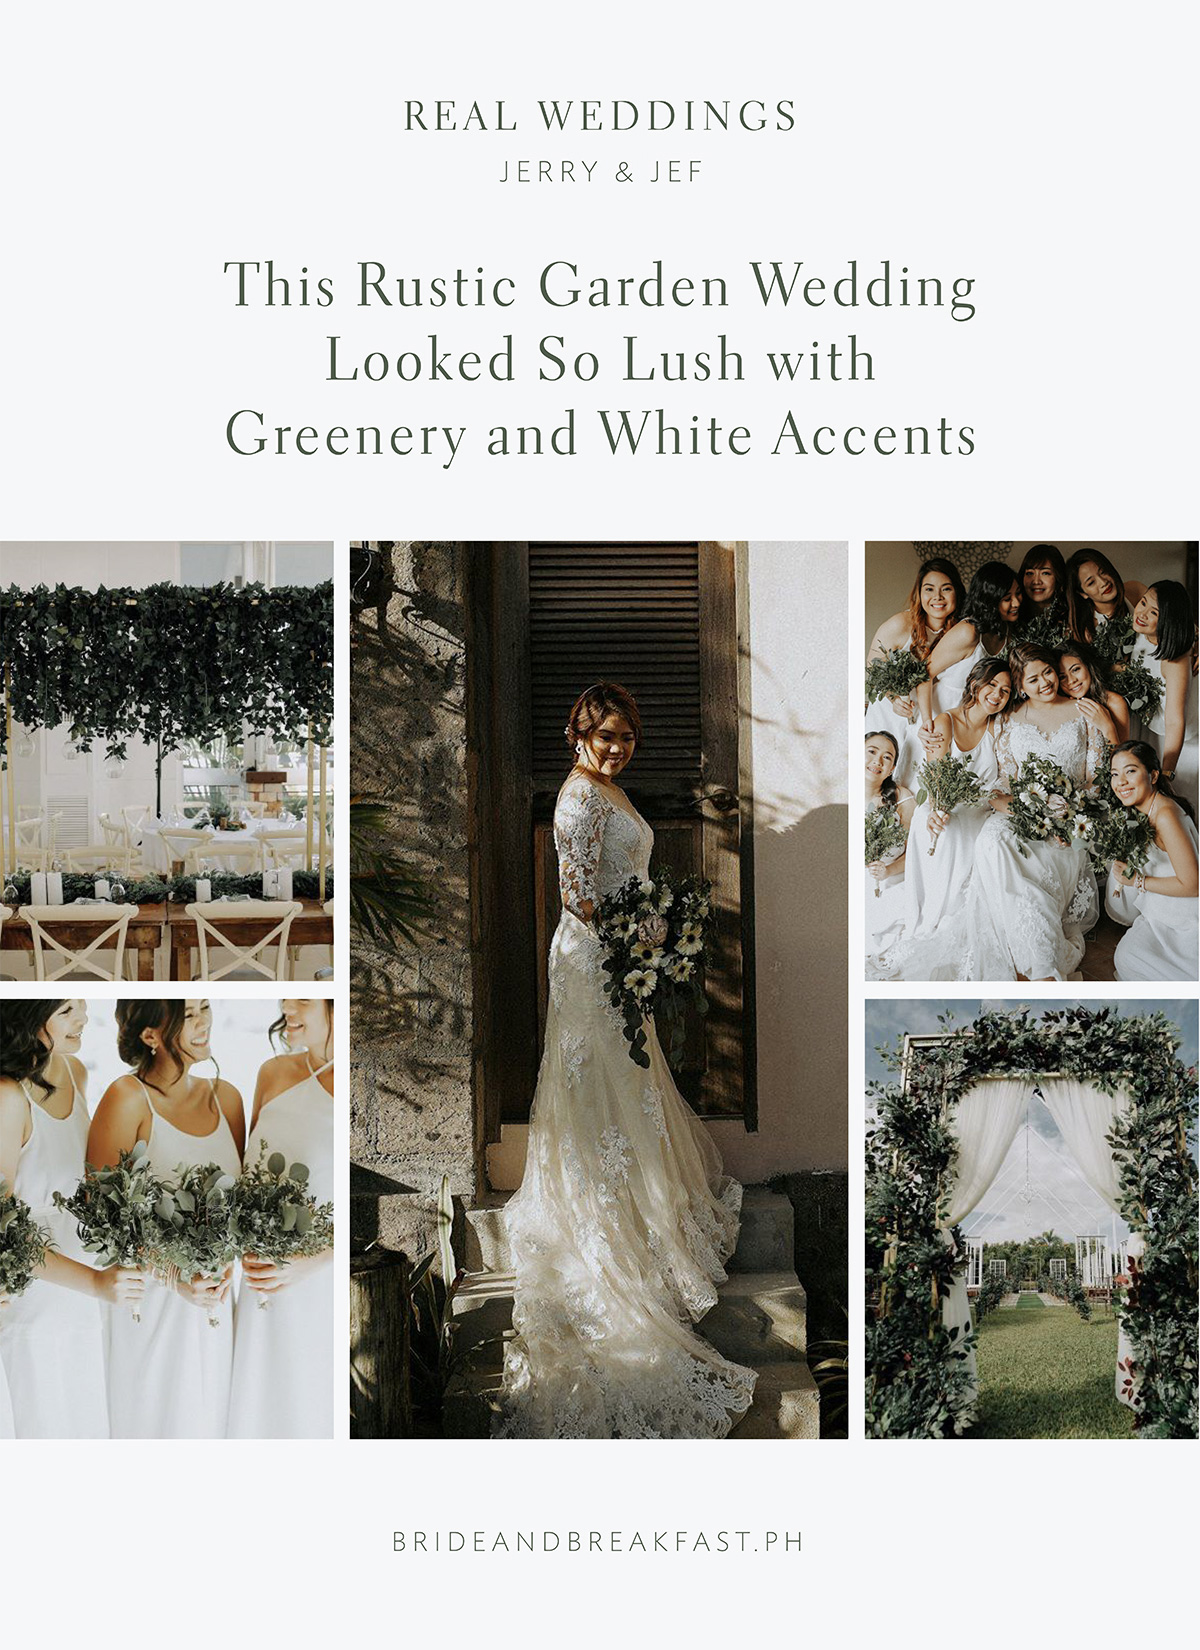 This Rustic Garden Wedding Looked So Lush with Greenery and White Accents